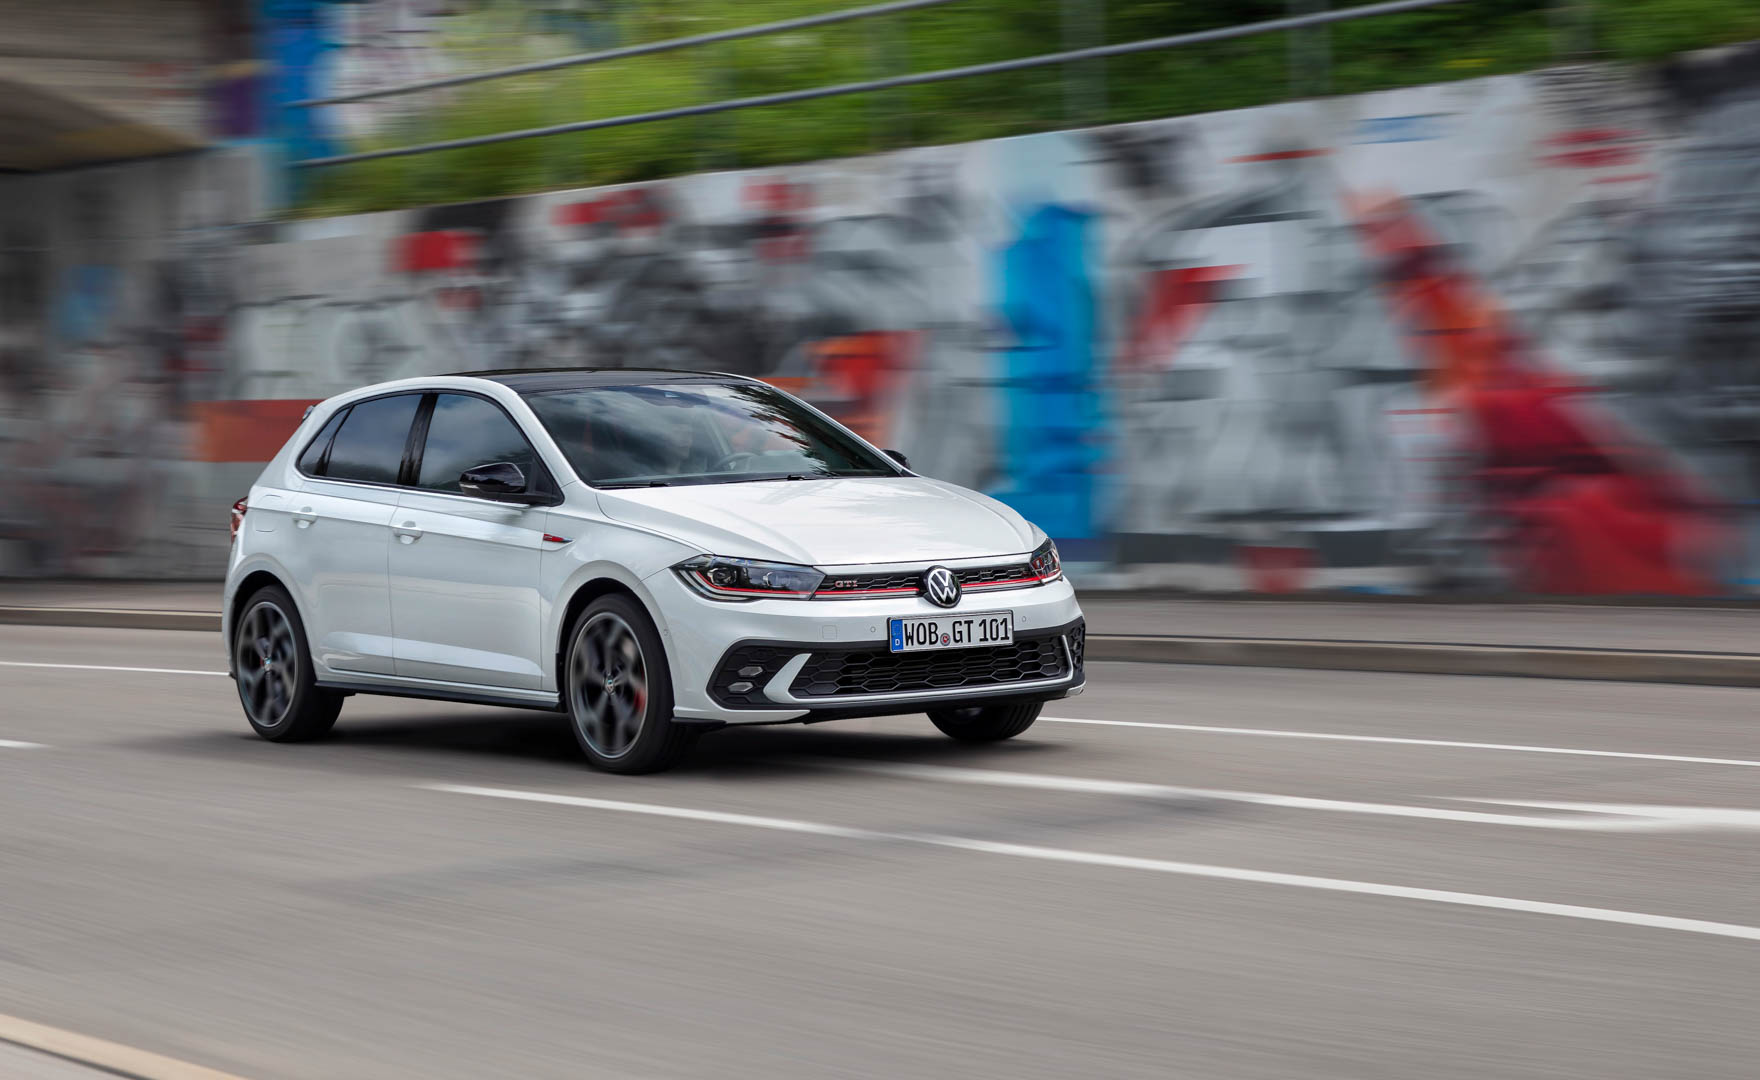 German Car Club Actually Wants Members to Drive Less to Use Less ...